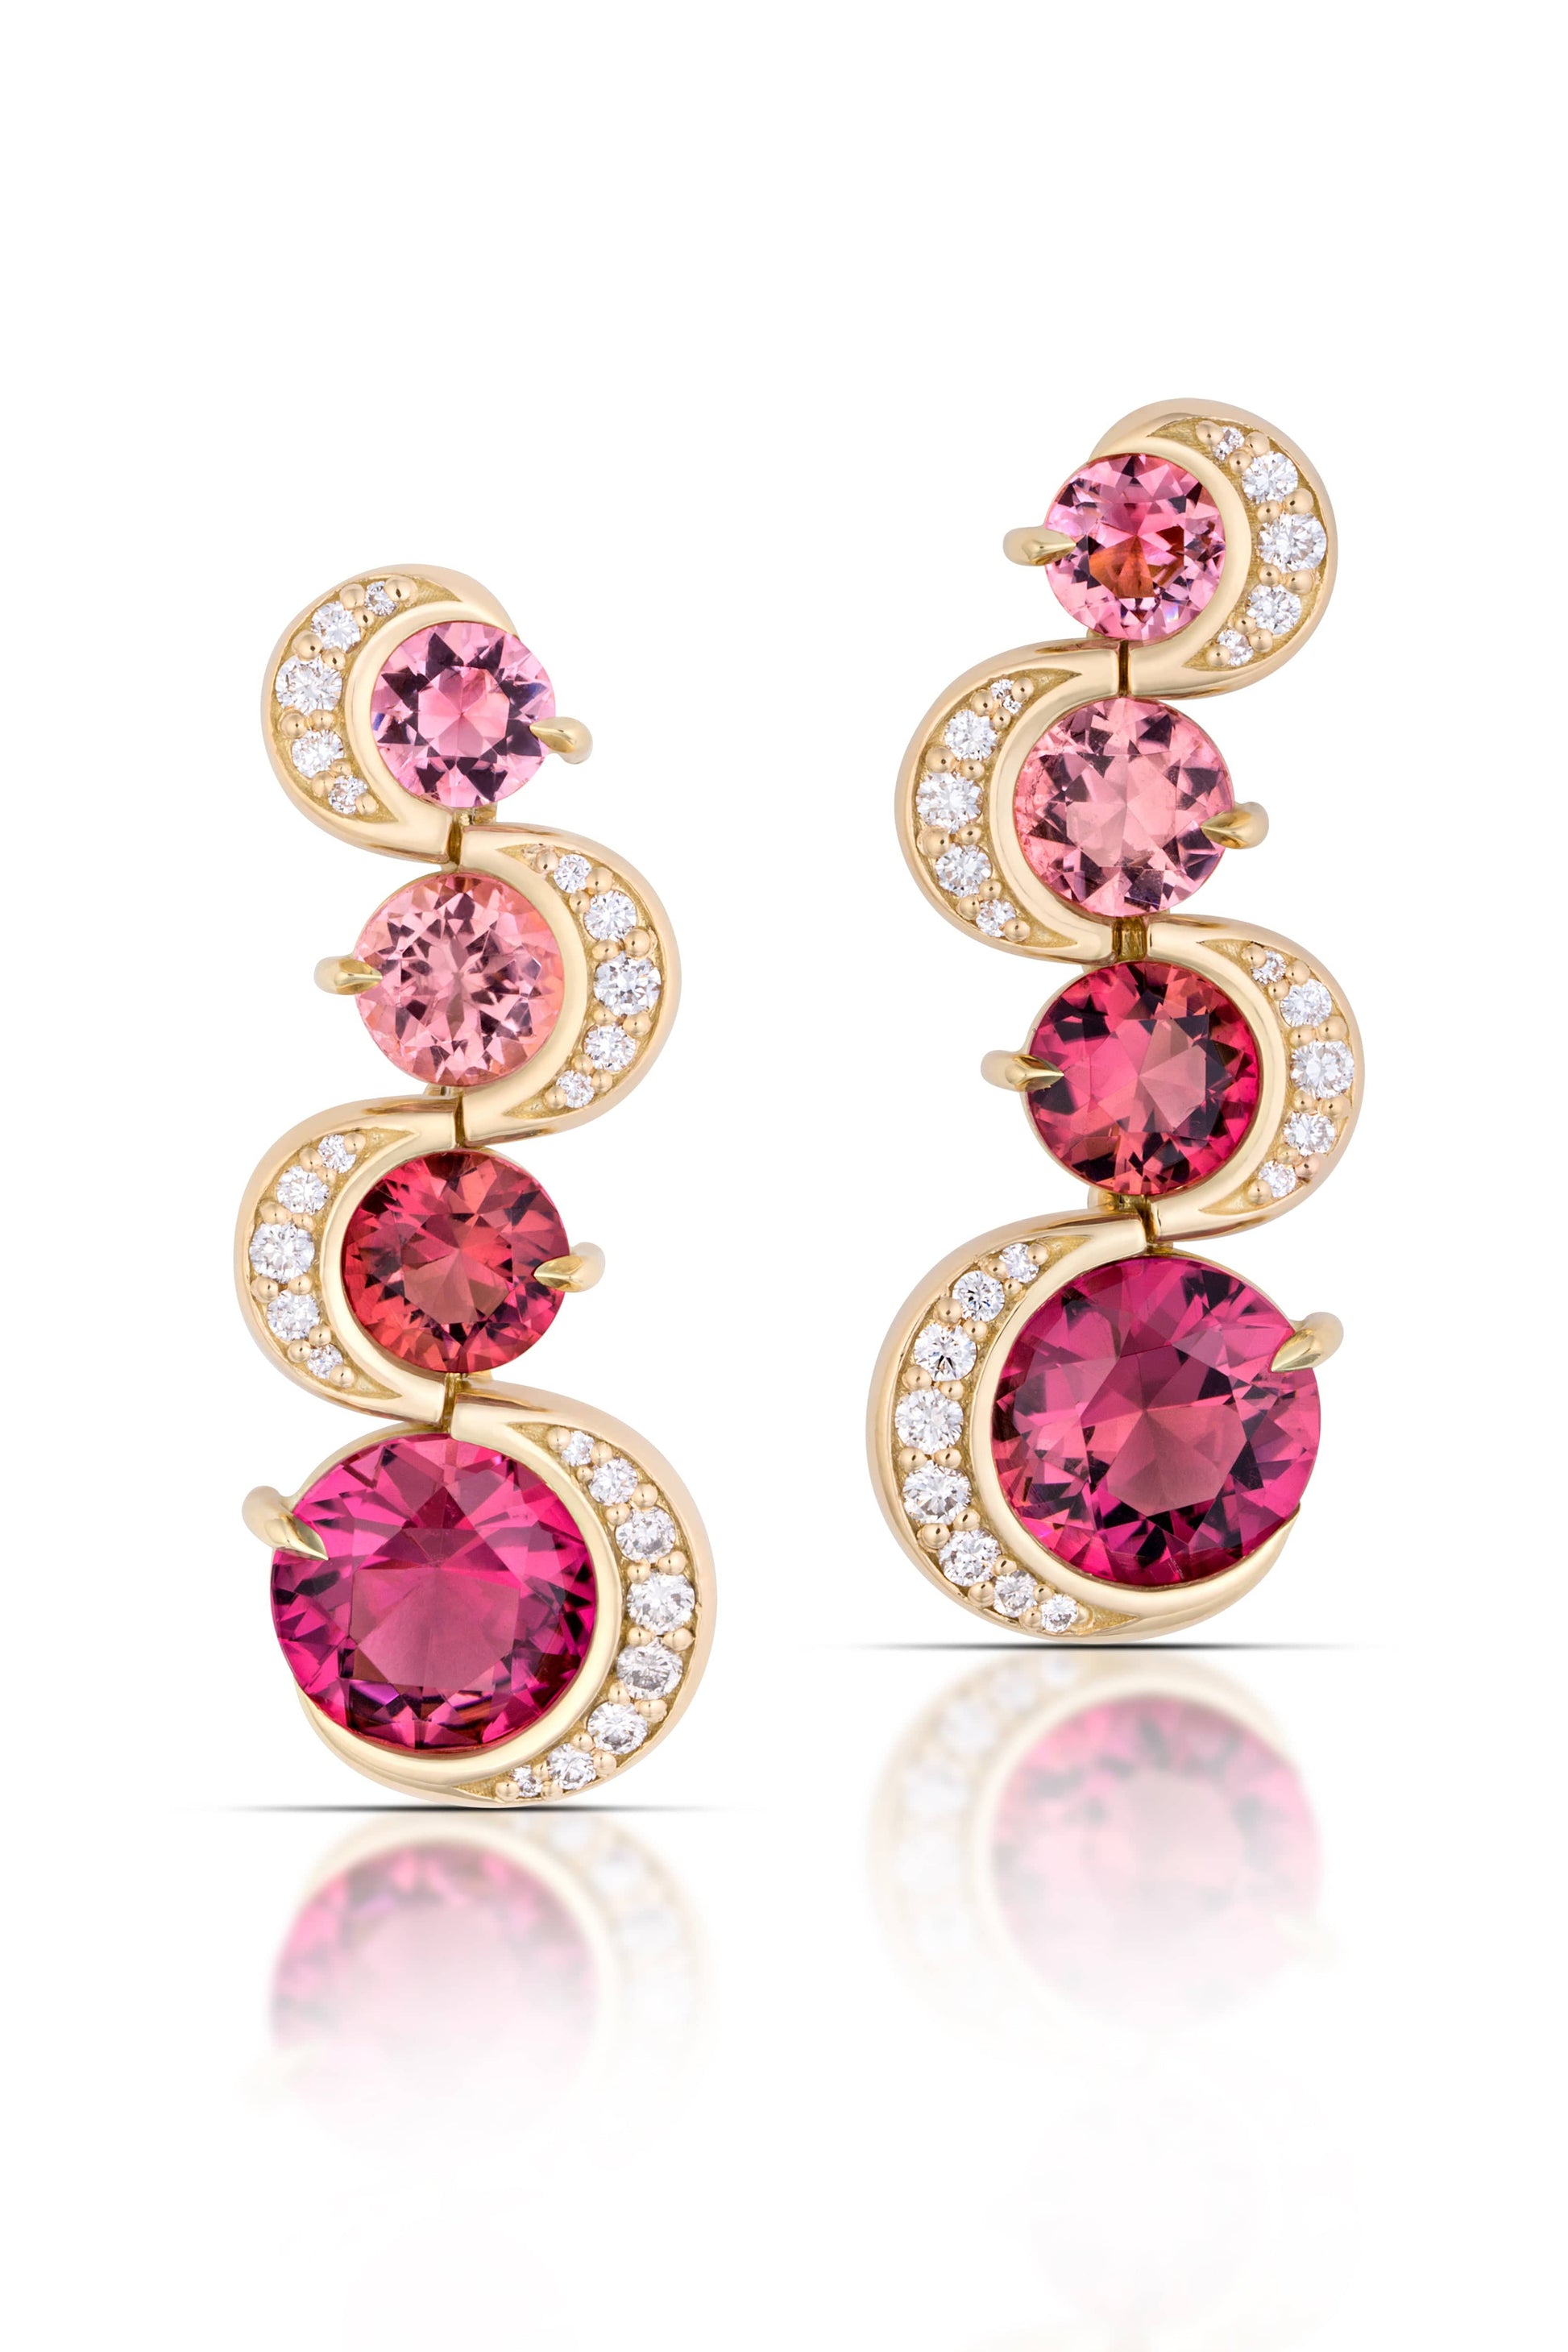 ANDY LIF-Pink Tourmaline Wave Earrings-YELLOW GOLD